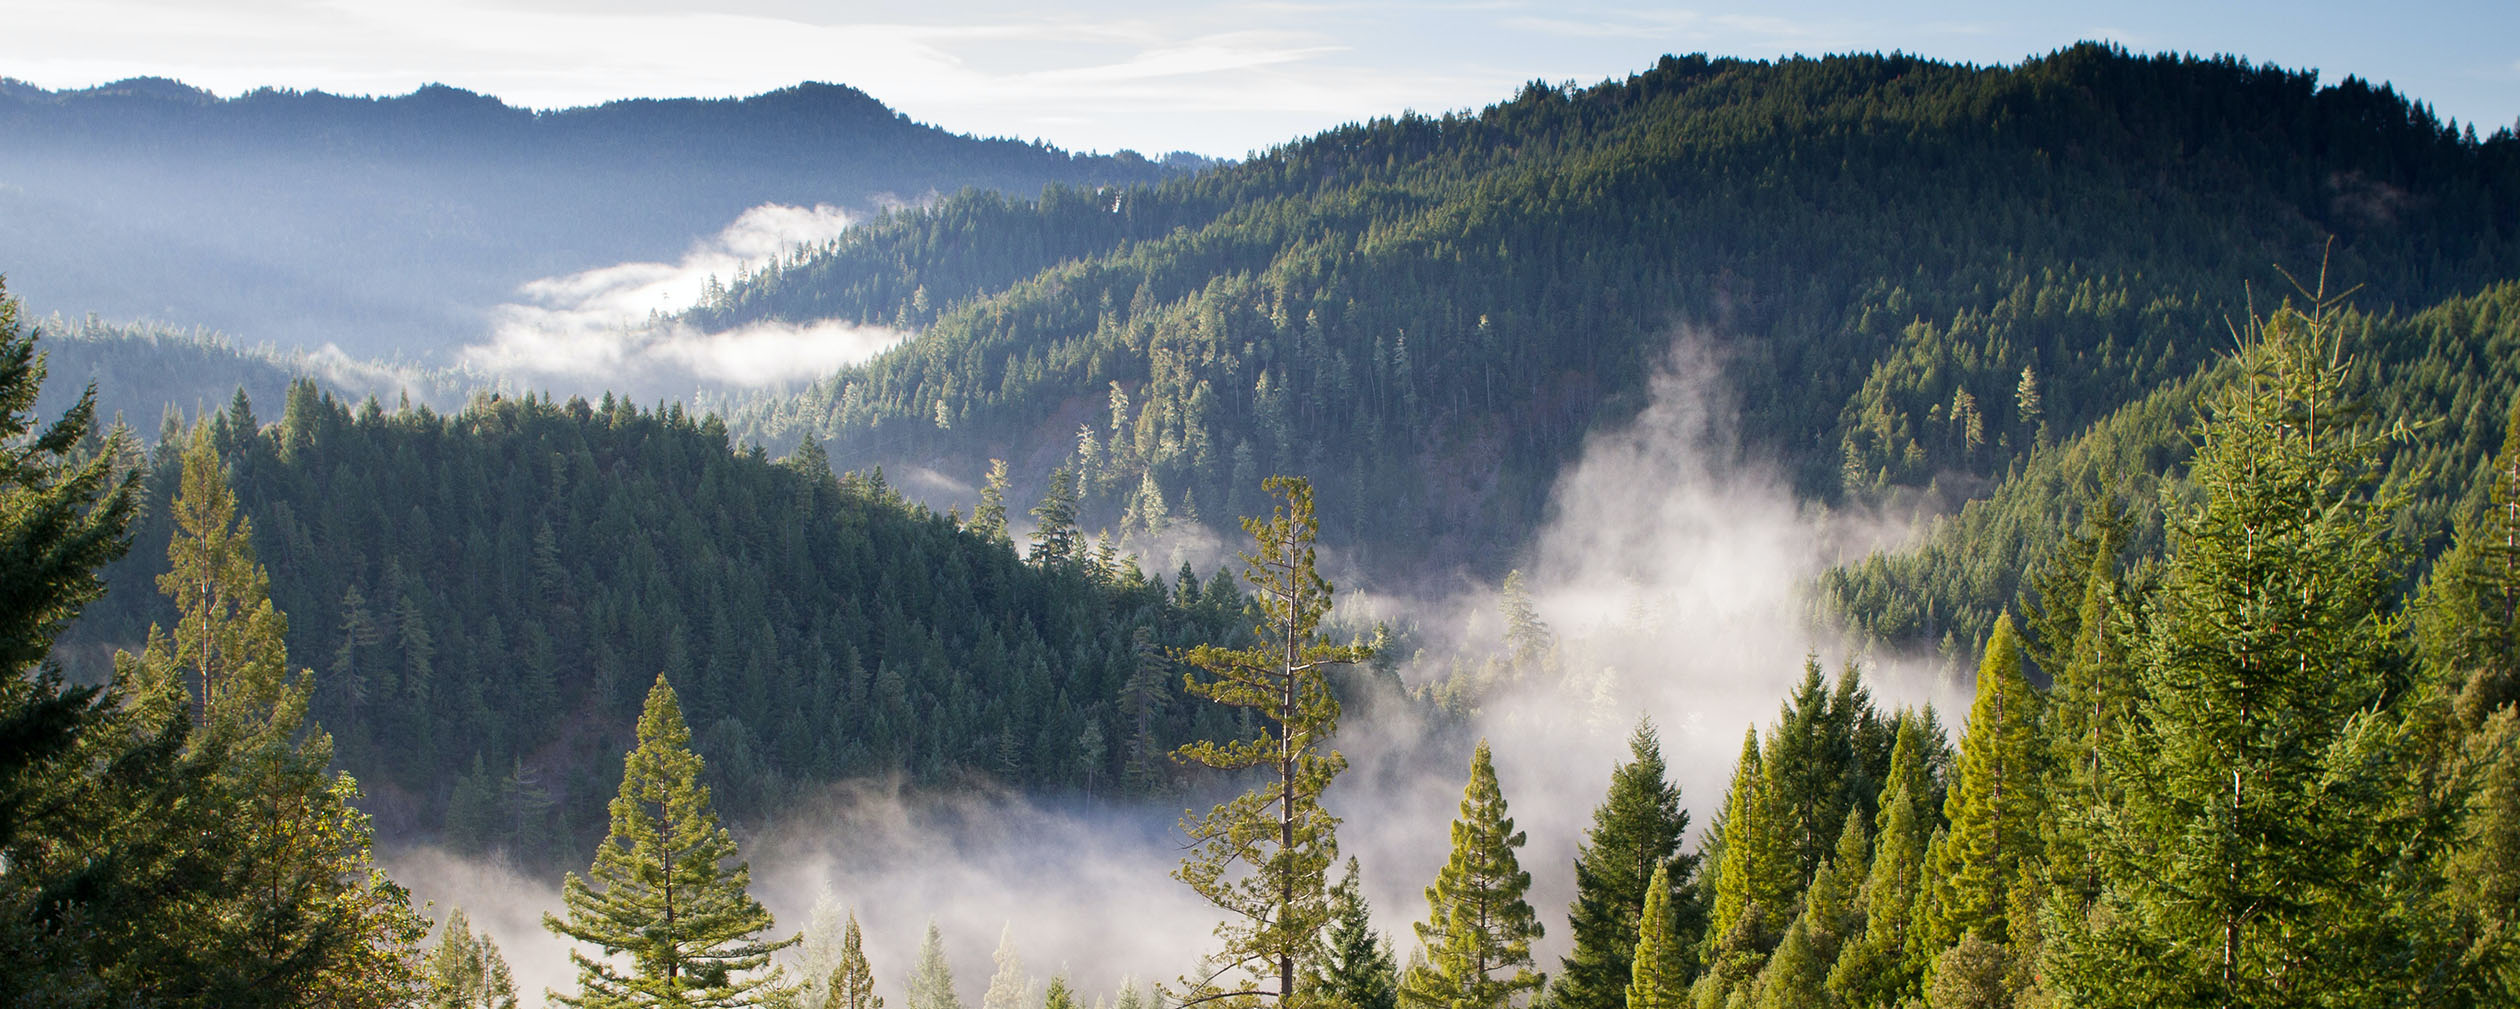 Image of mountains, trees and mist. Image by Paul Summers, Unsplash.com.